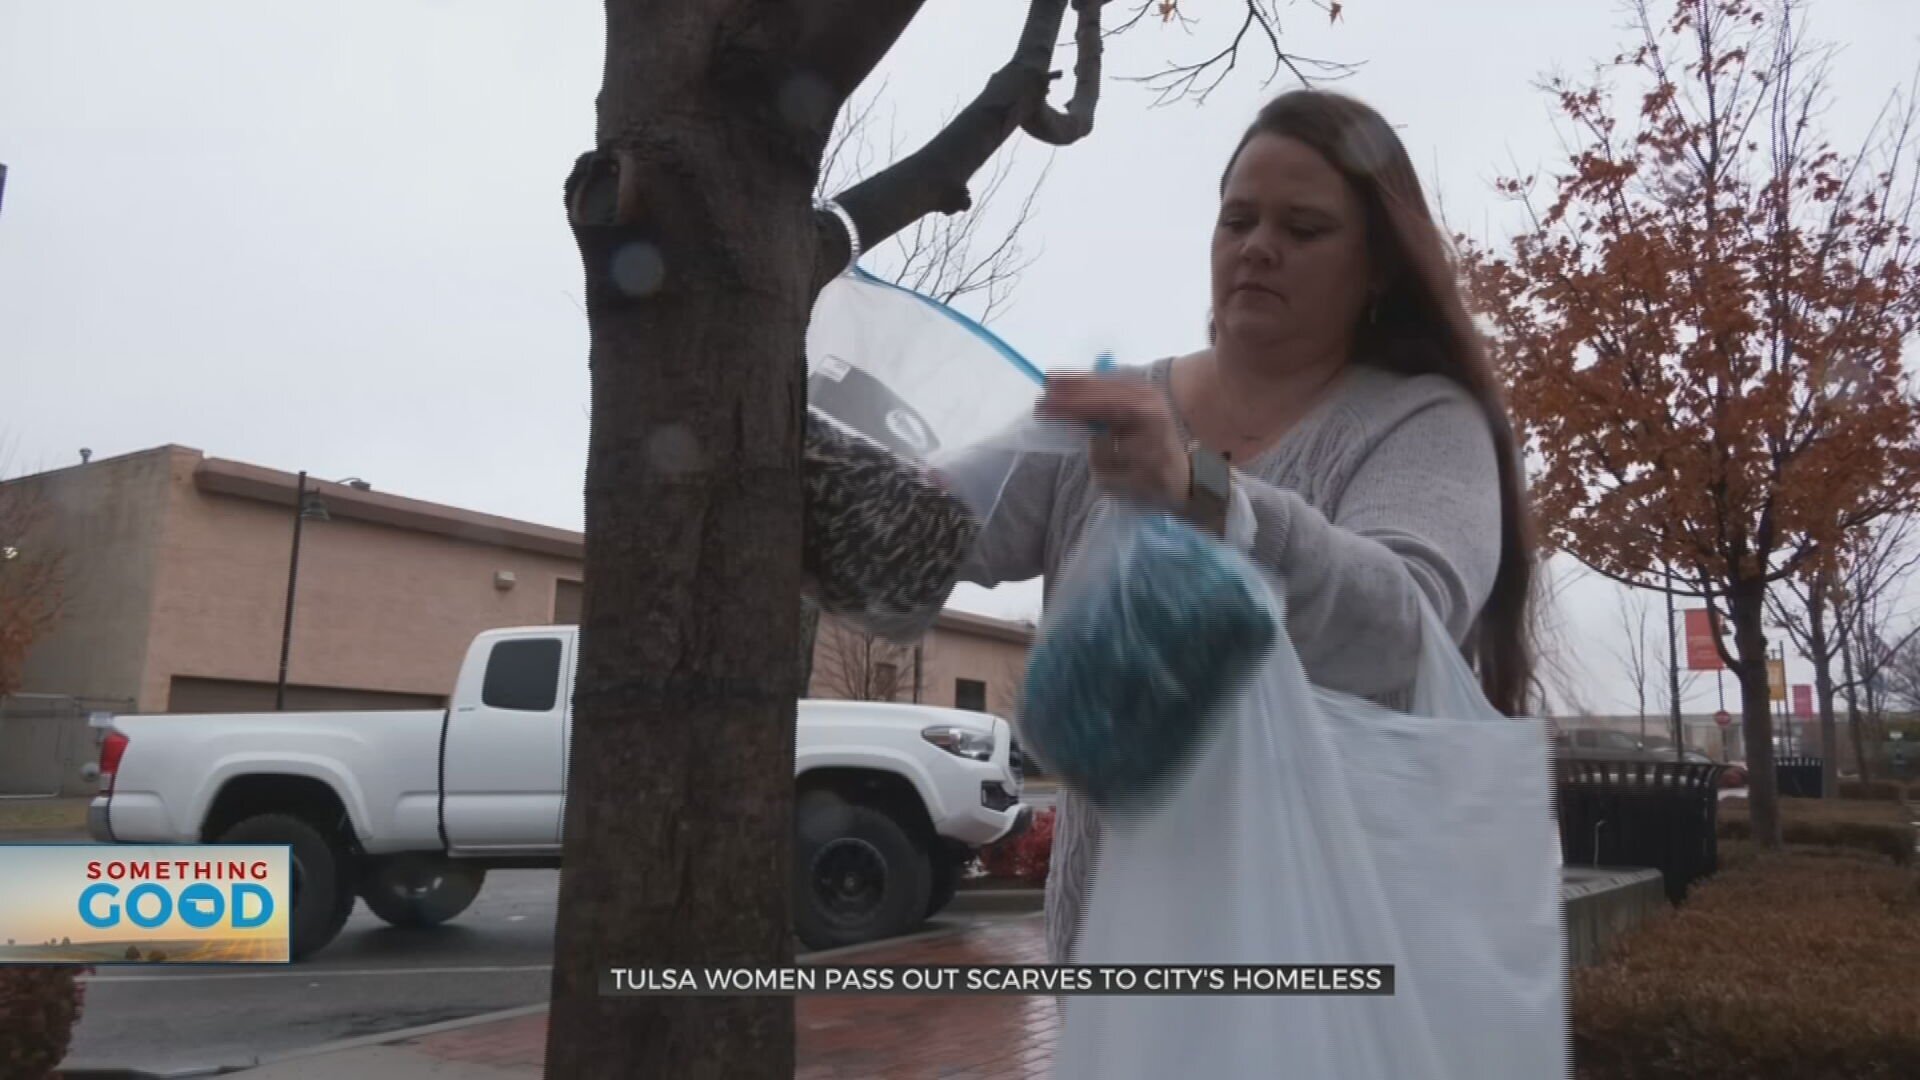 2 Tulsa Women On 2-Year Movement To Warm City’s Homeless With Scarves 